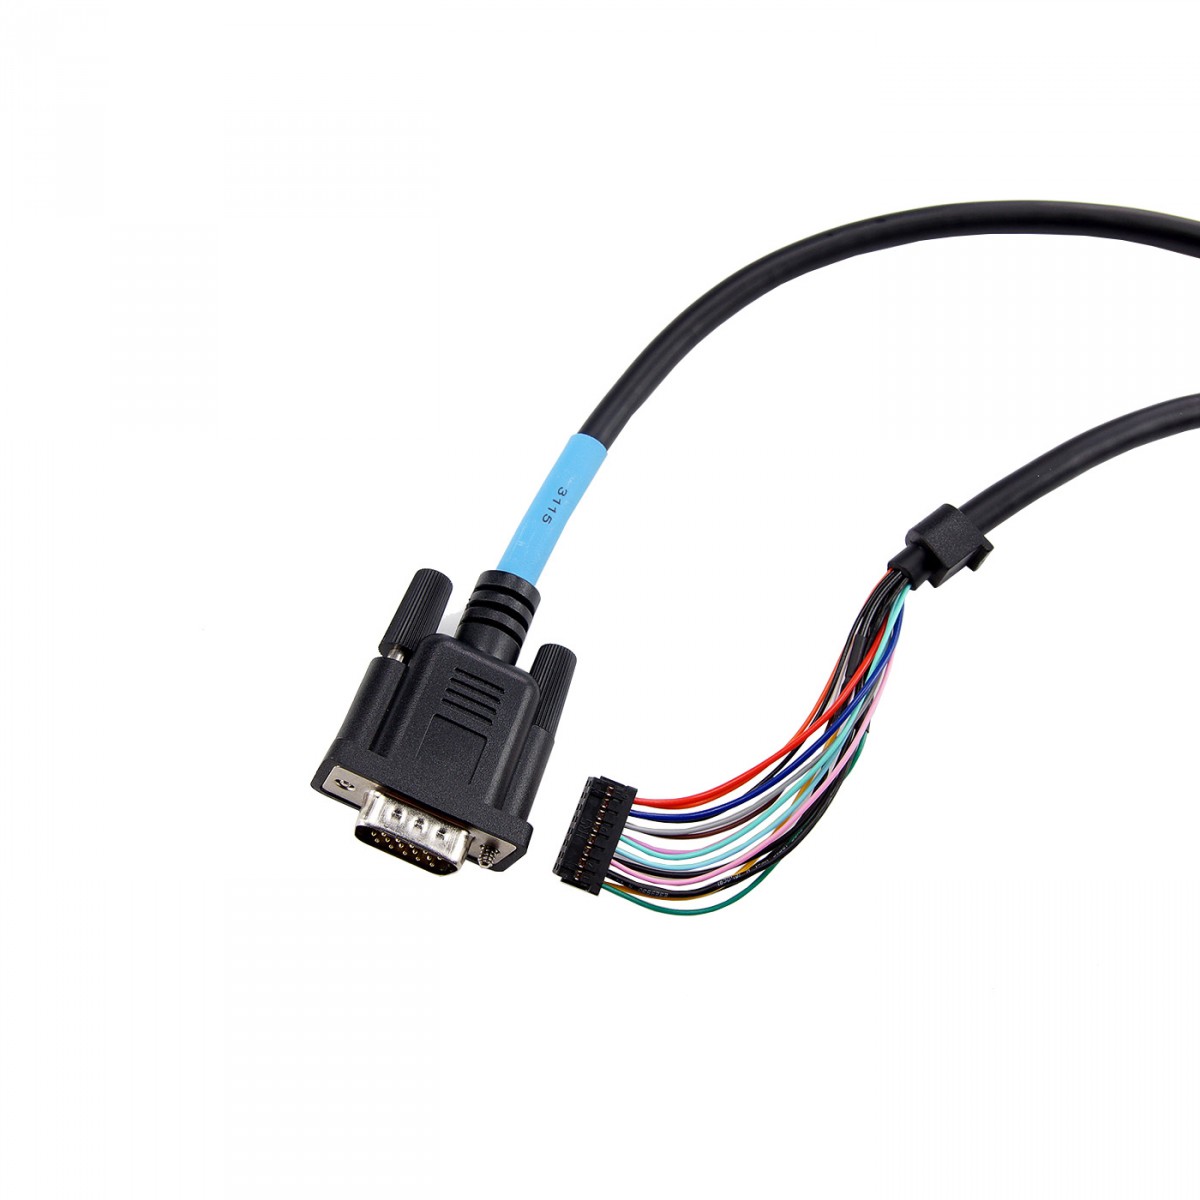 SEPURA 2m connection cable for remote control, for SRG/SCG 300-00068